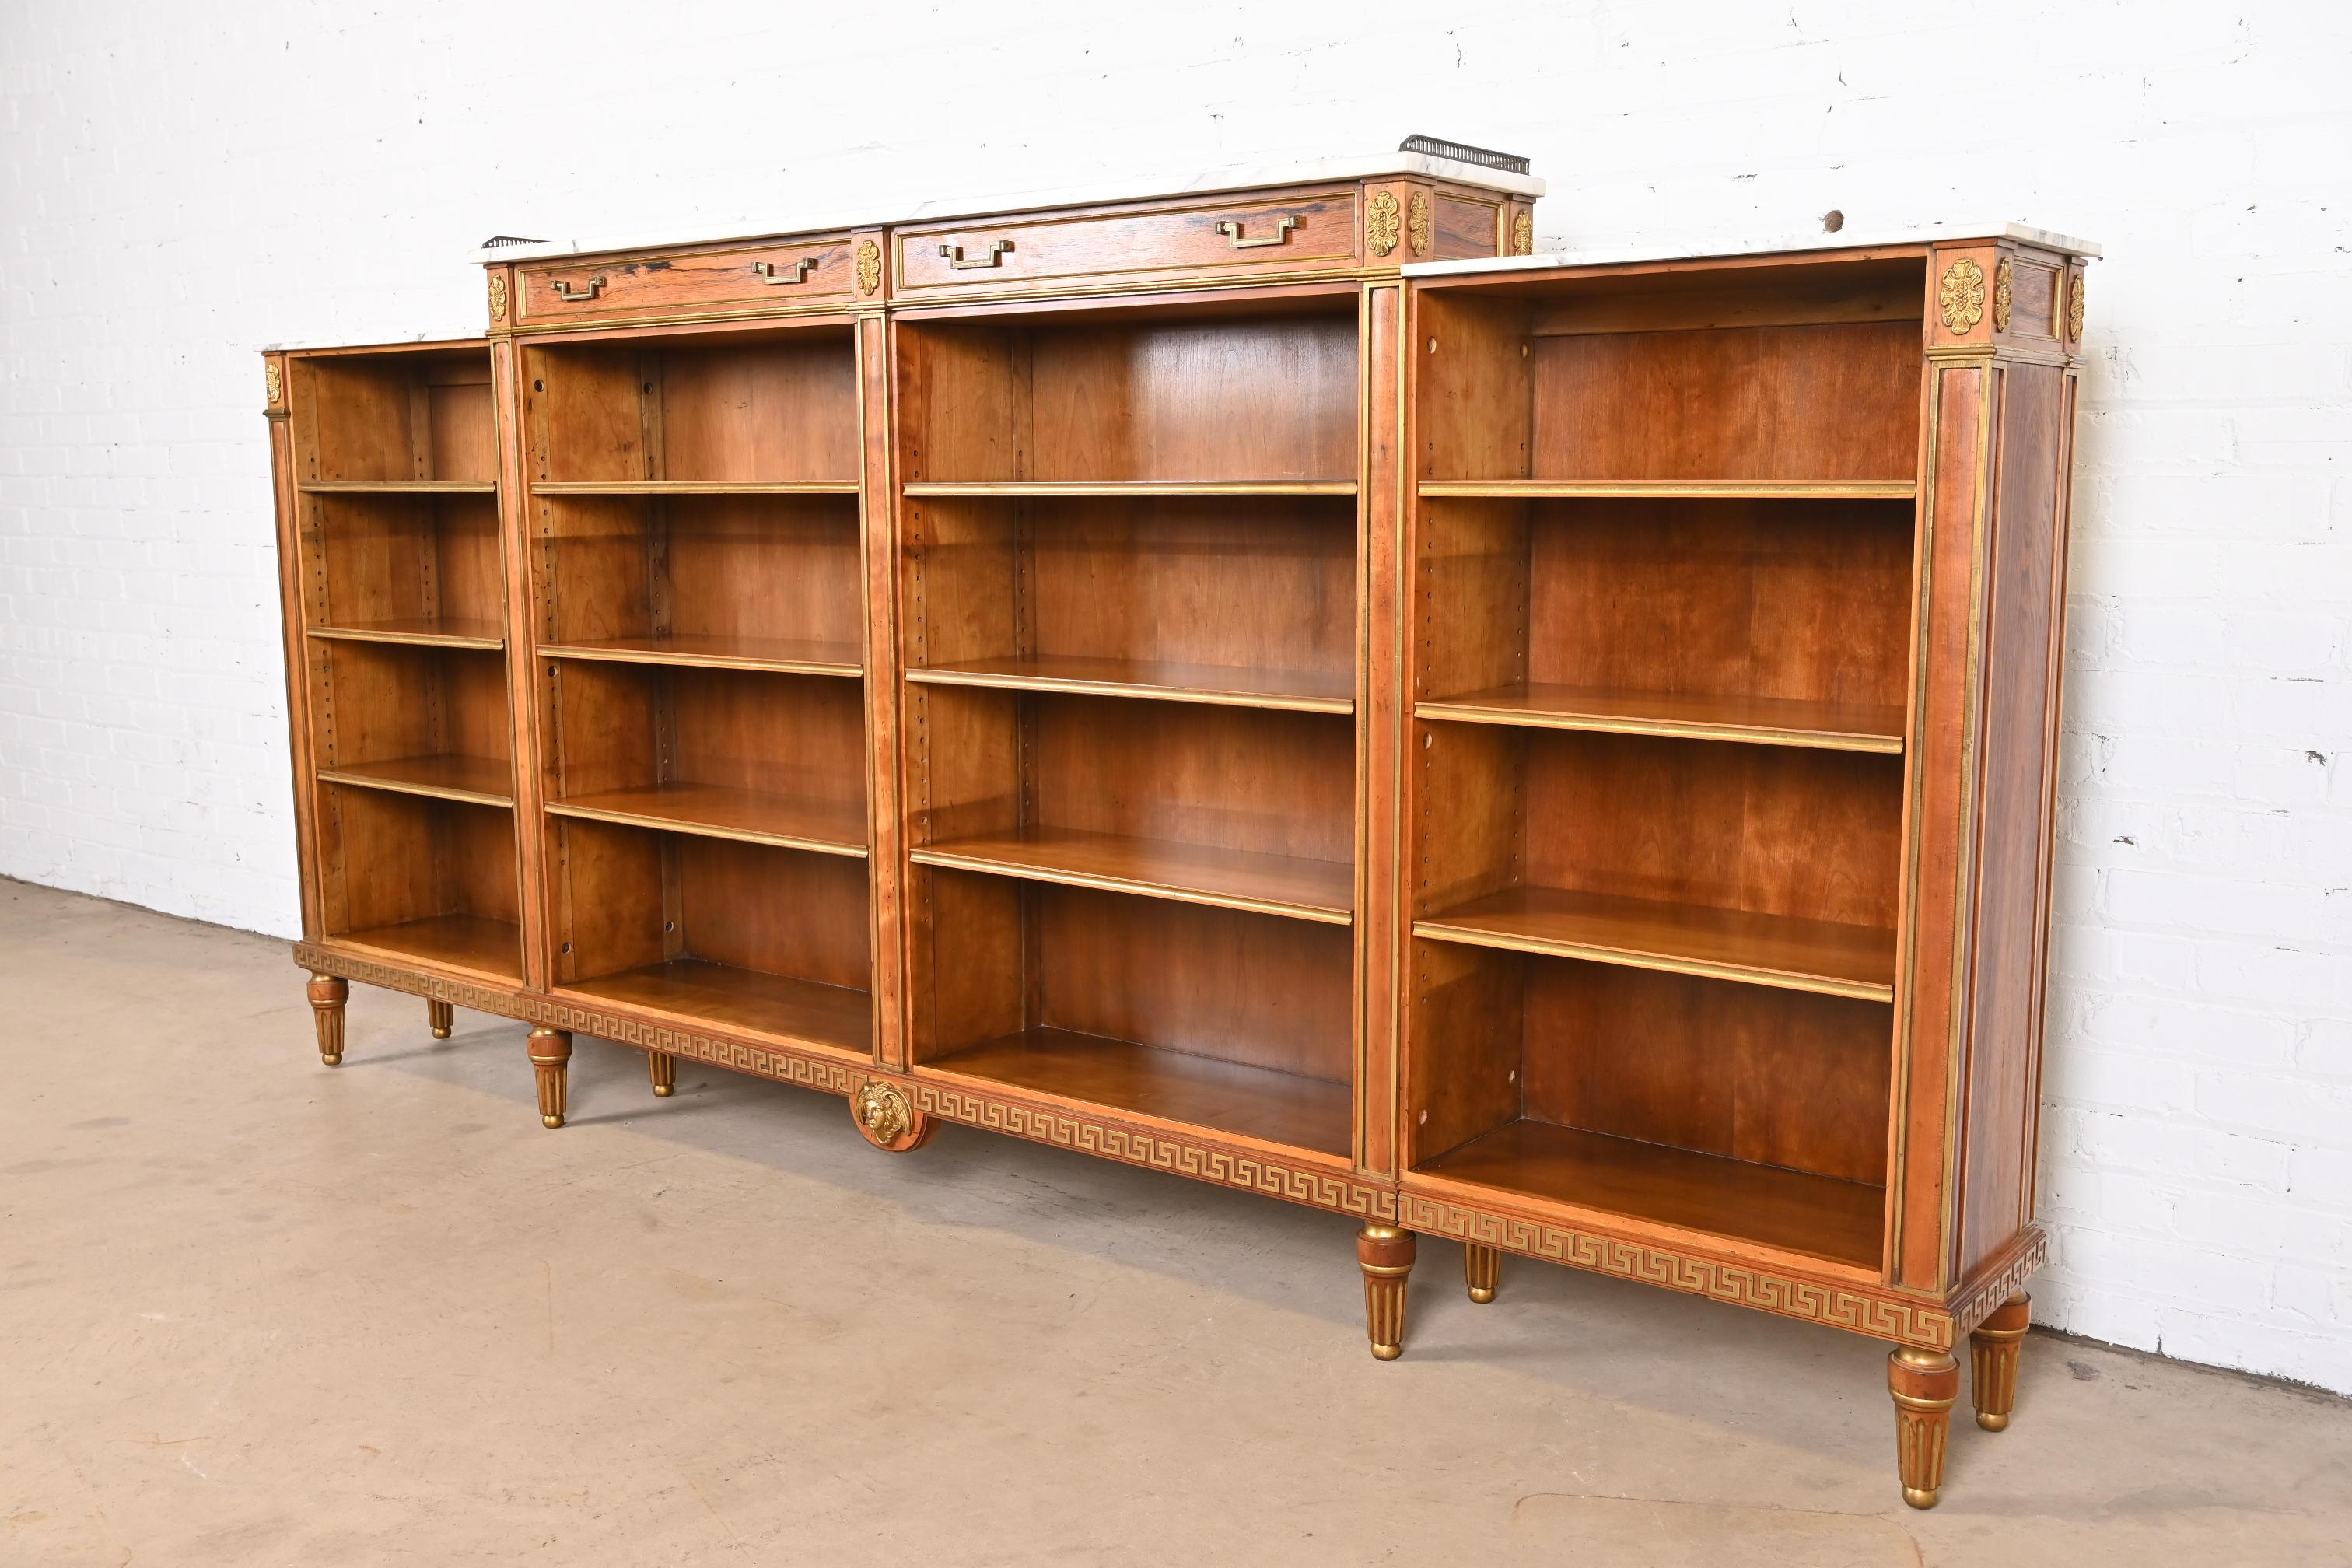 An outstanding Neoclassical or Louis XVI style monumental bookcase

By Baker Furniture, 